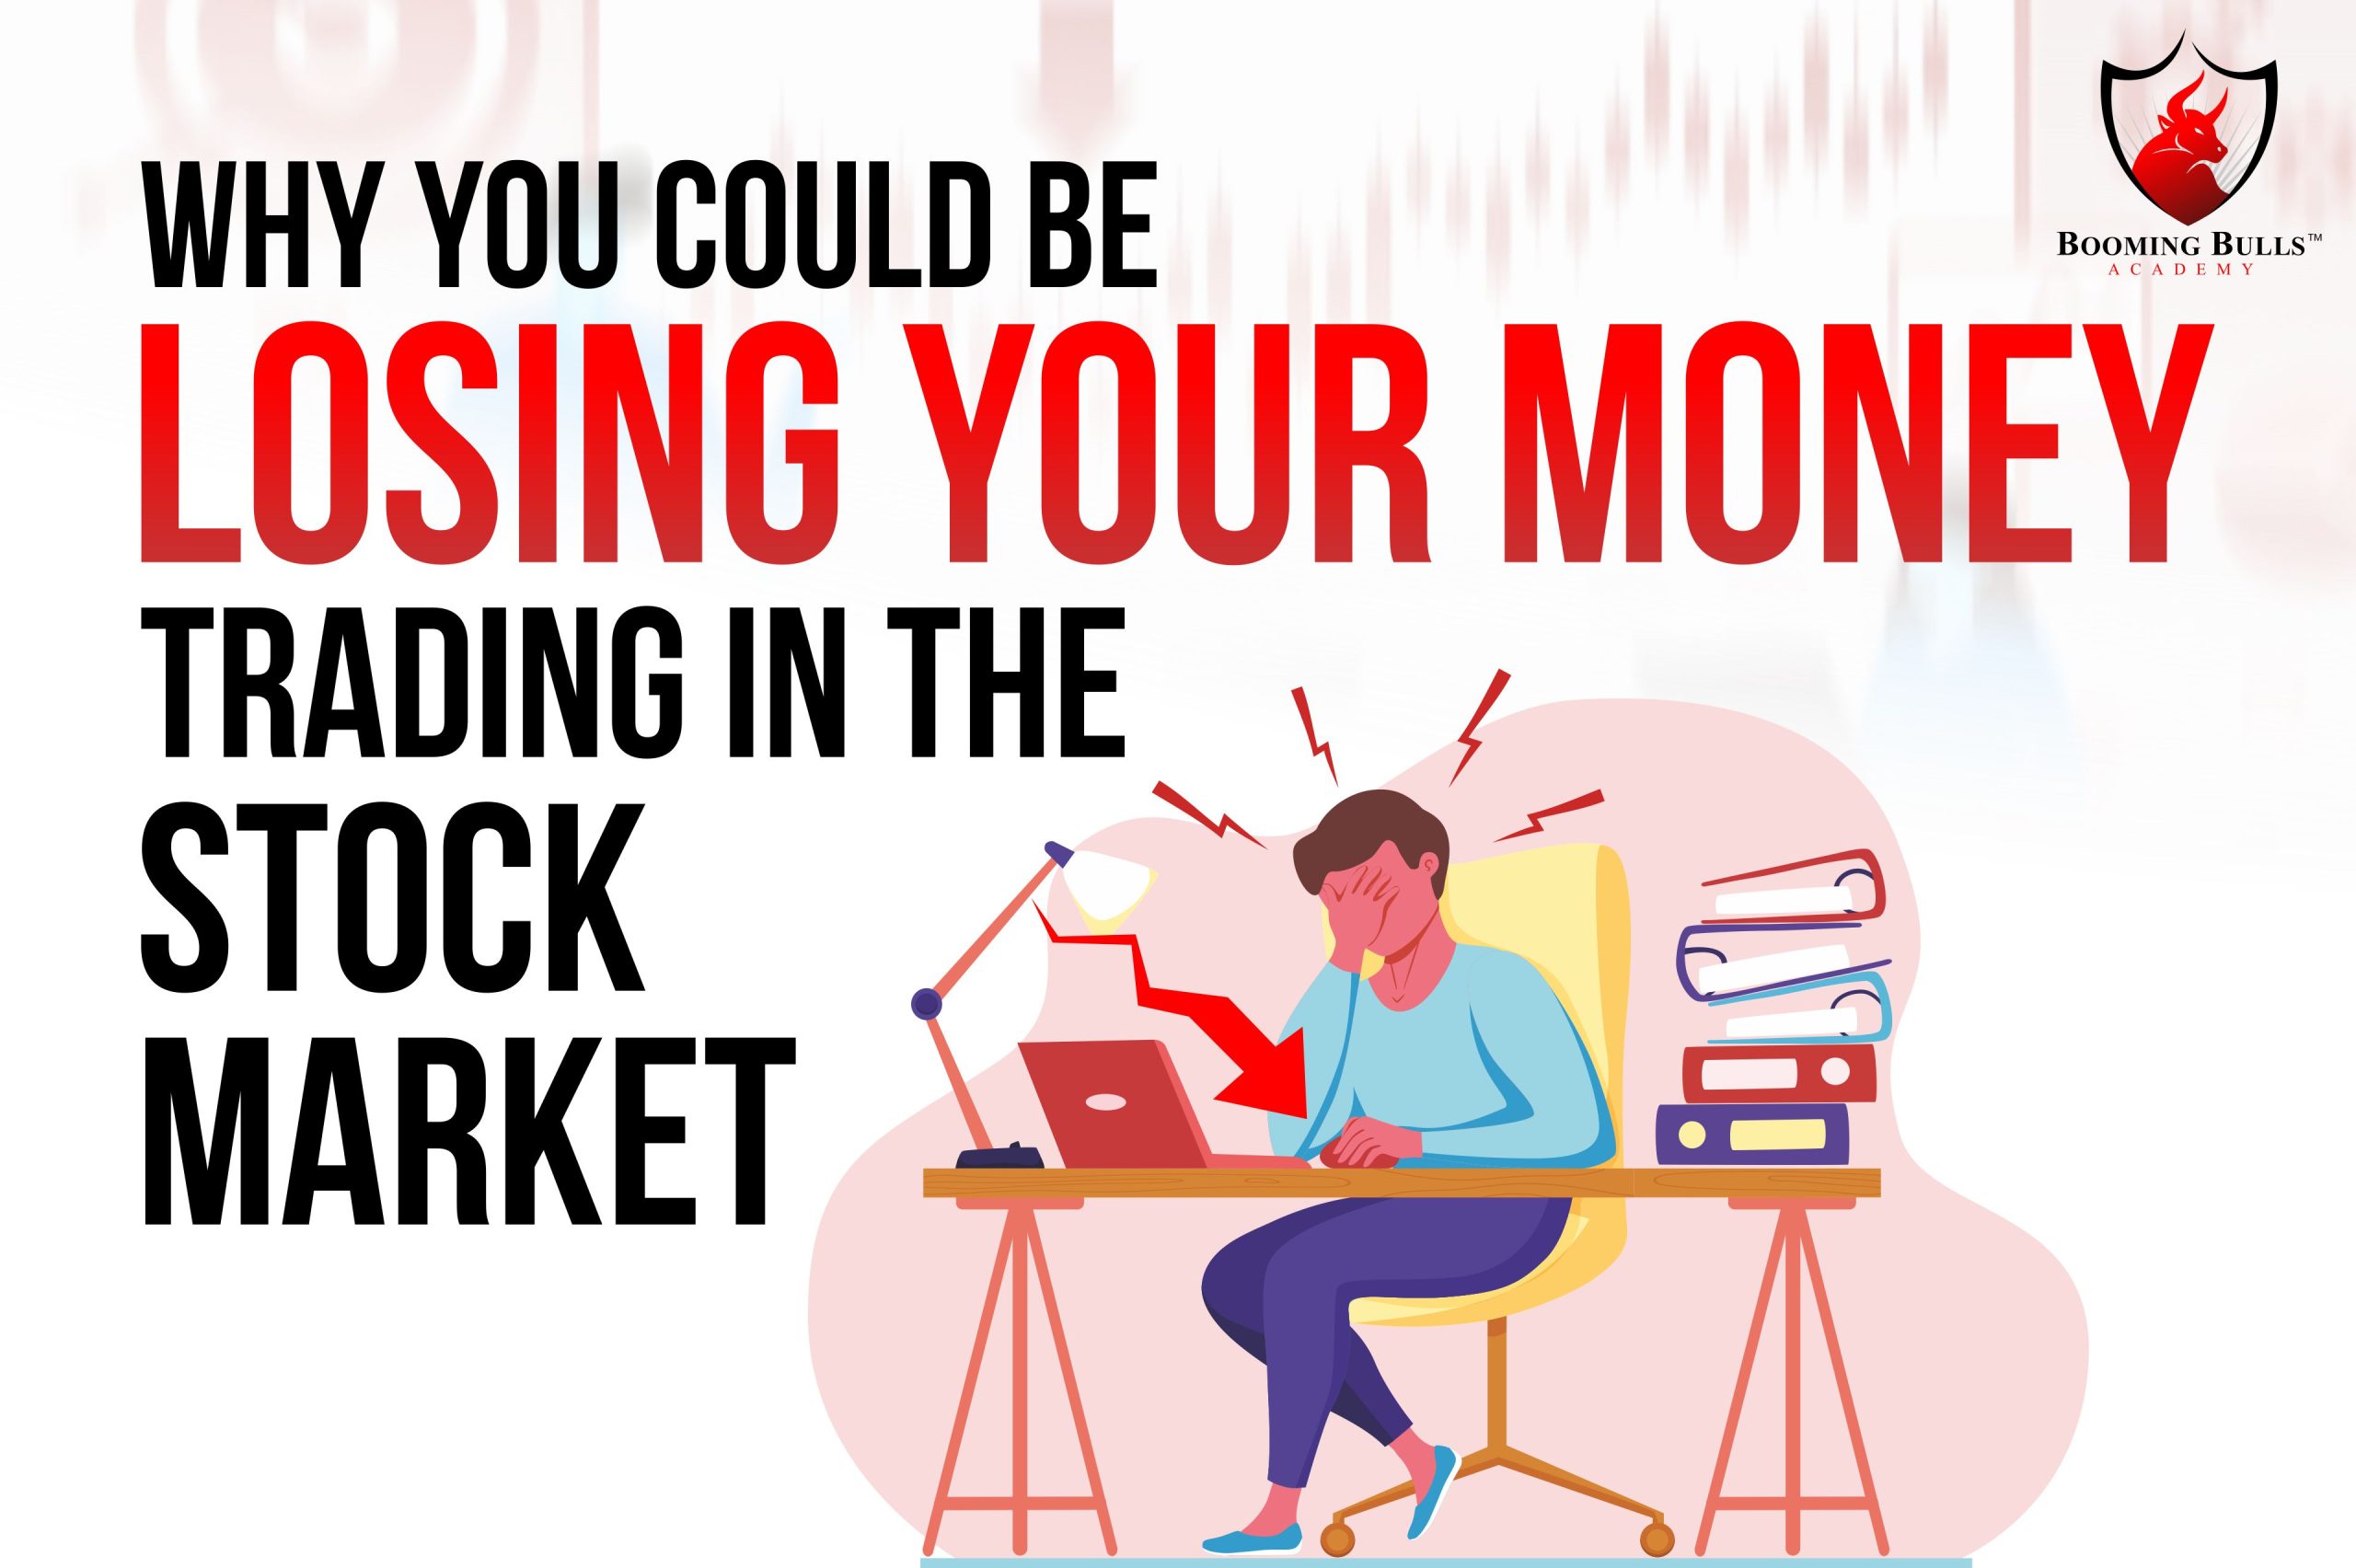 Why You Could Be Losing Your Money Trading In The Stock Market